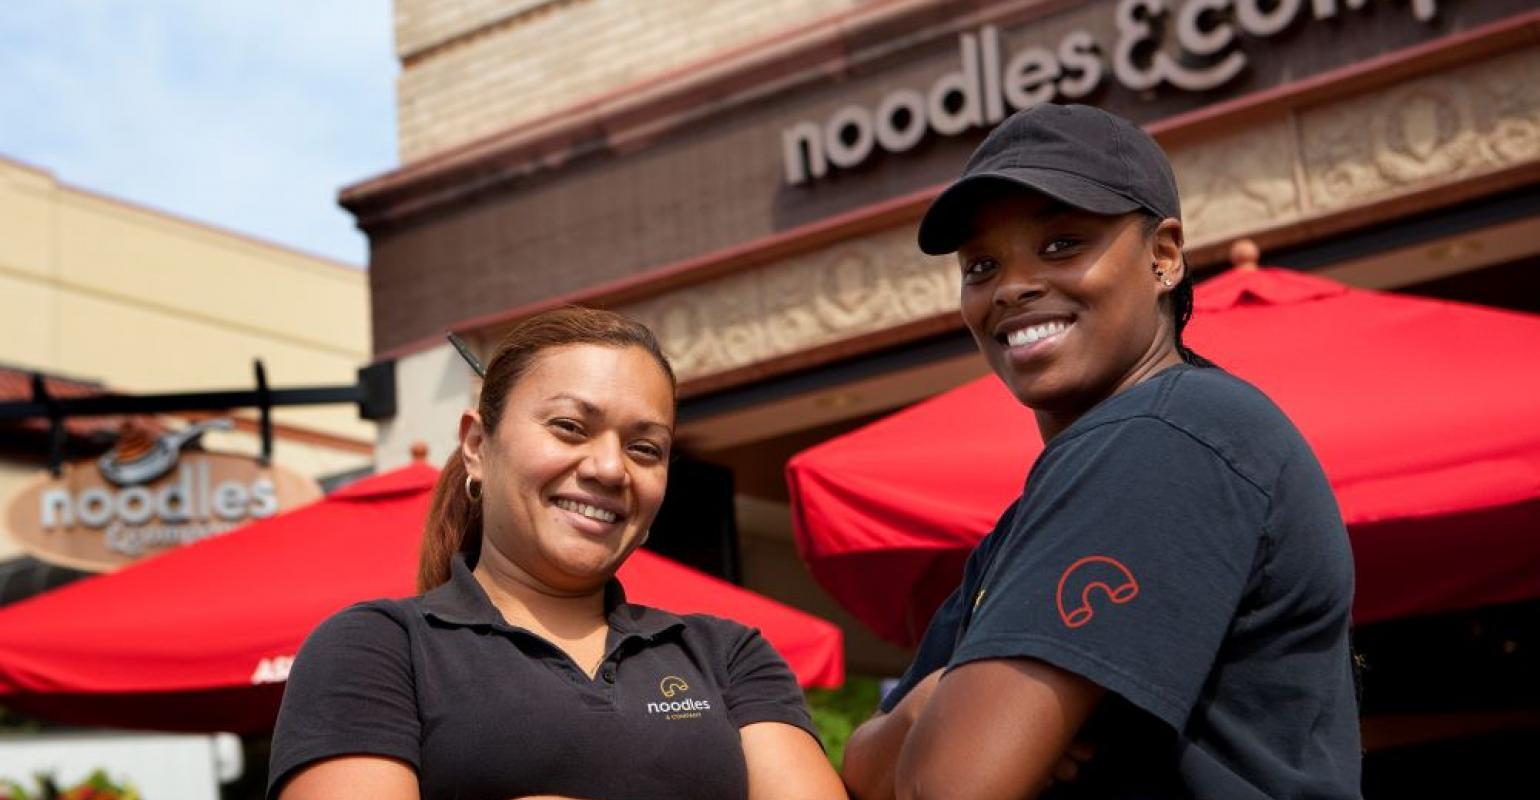 Several restaurant companies named as ‘great workplaces for women’